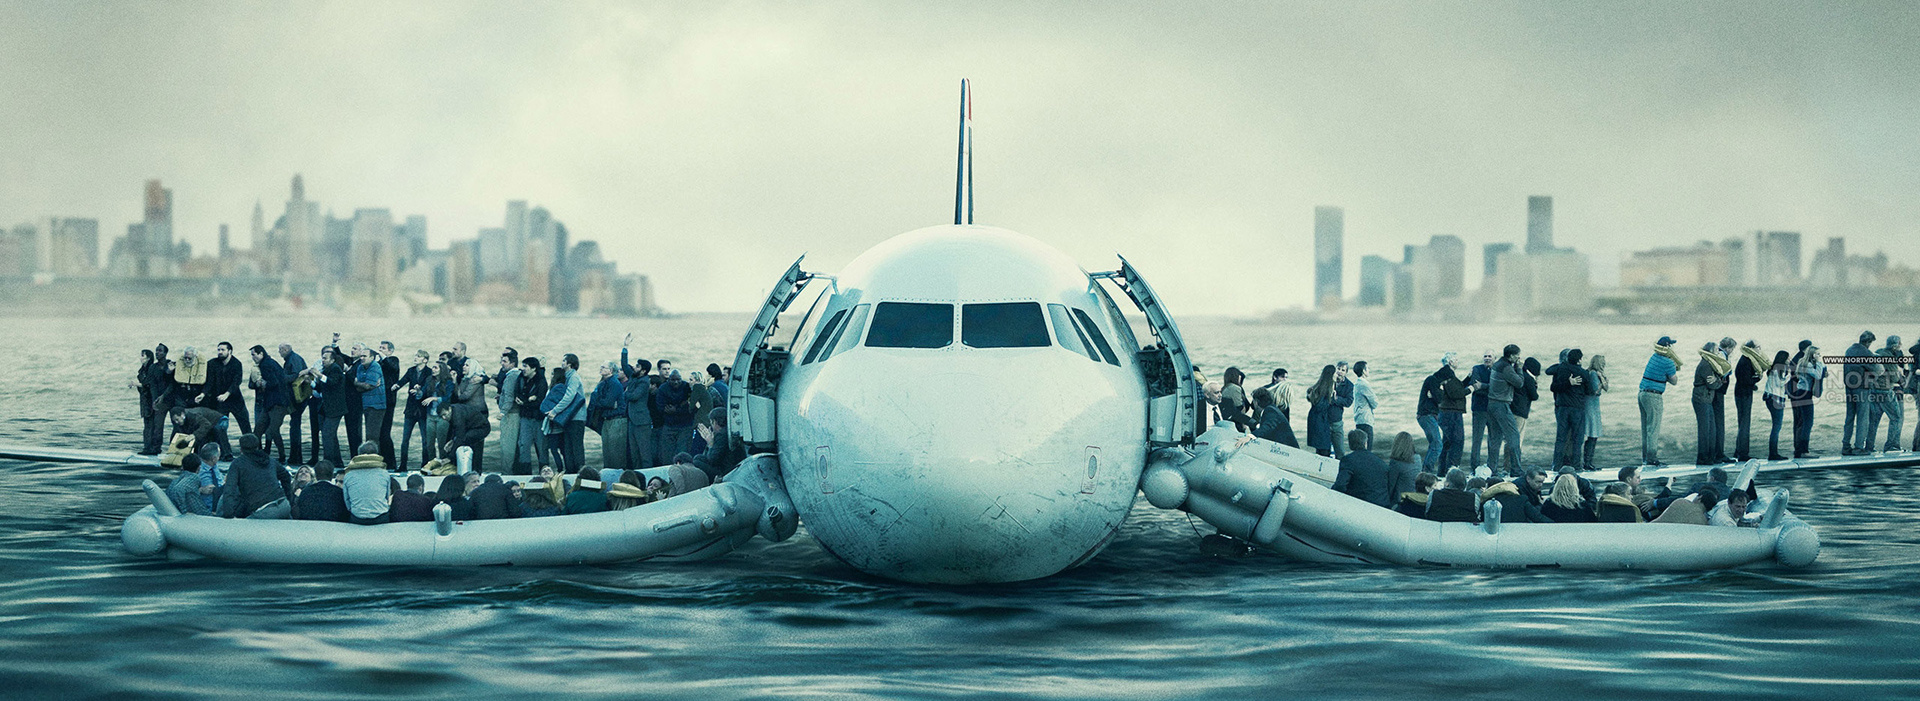 Movie poster Sully: Miracle on the Hudson